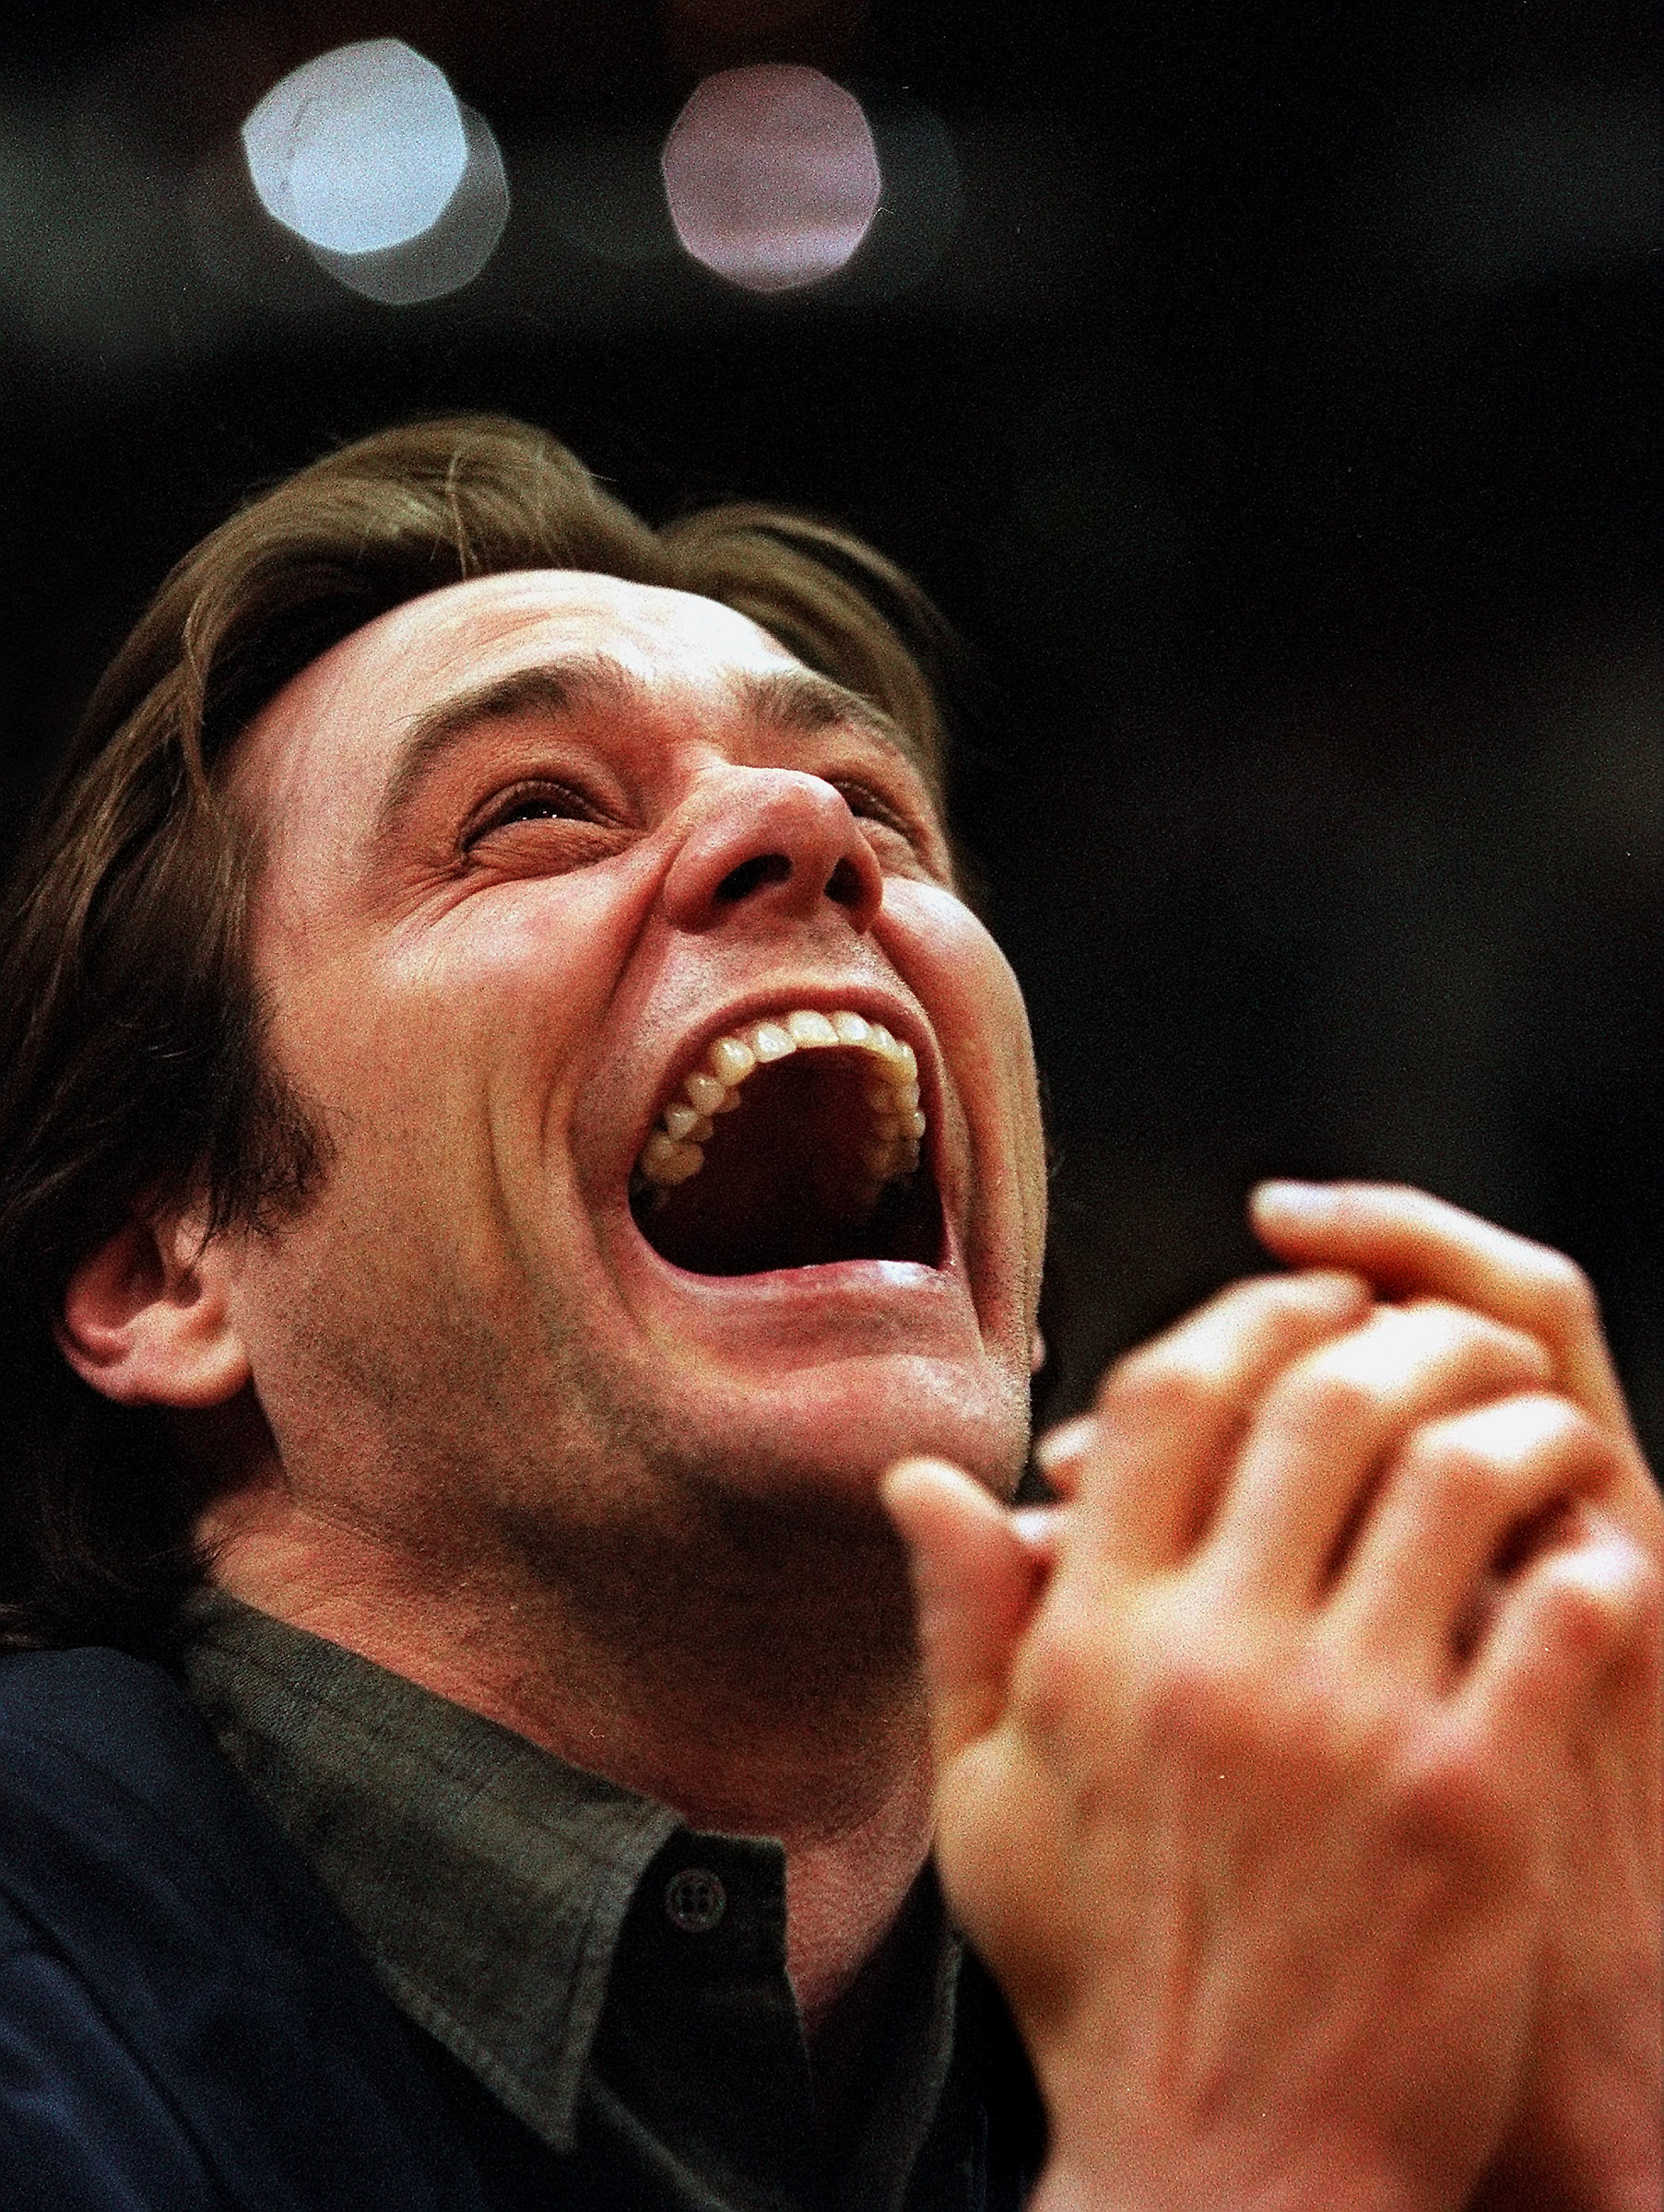 Jim Carrey pictured laughing while seeing himself on the scoreboard at Staples Center during a Los Angeles Lakers game | Source: Getty Images